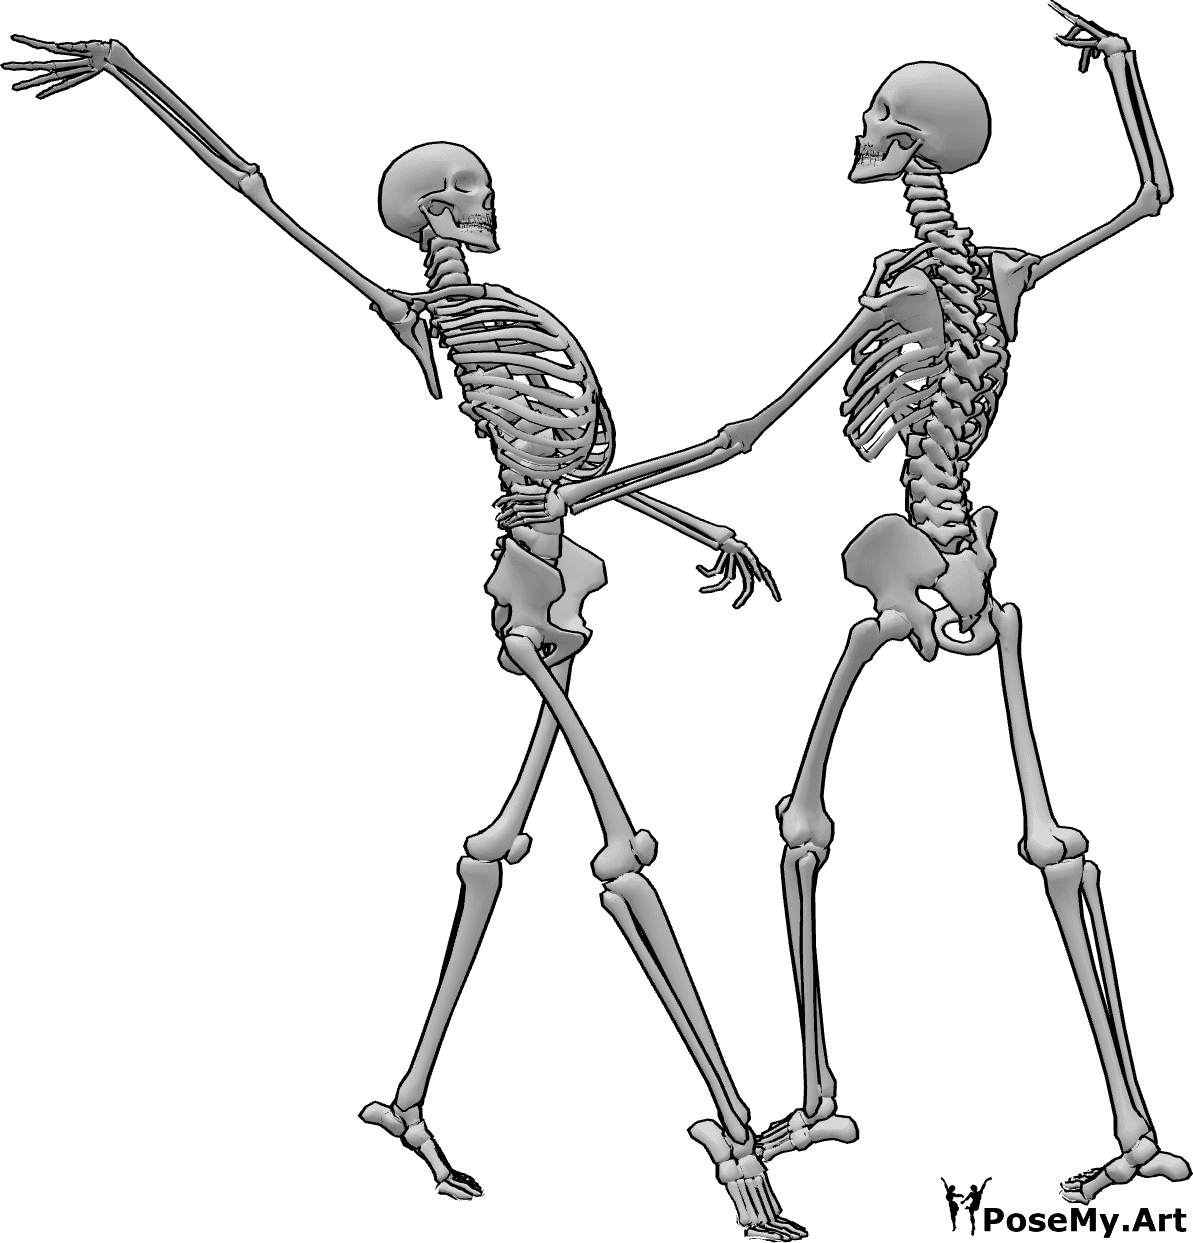 Pose Reference- Skeleton romantic dance pose - Two skeletons are romantic dancing together and posing